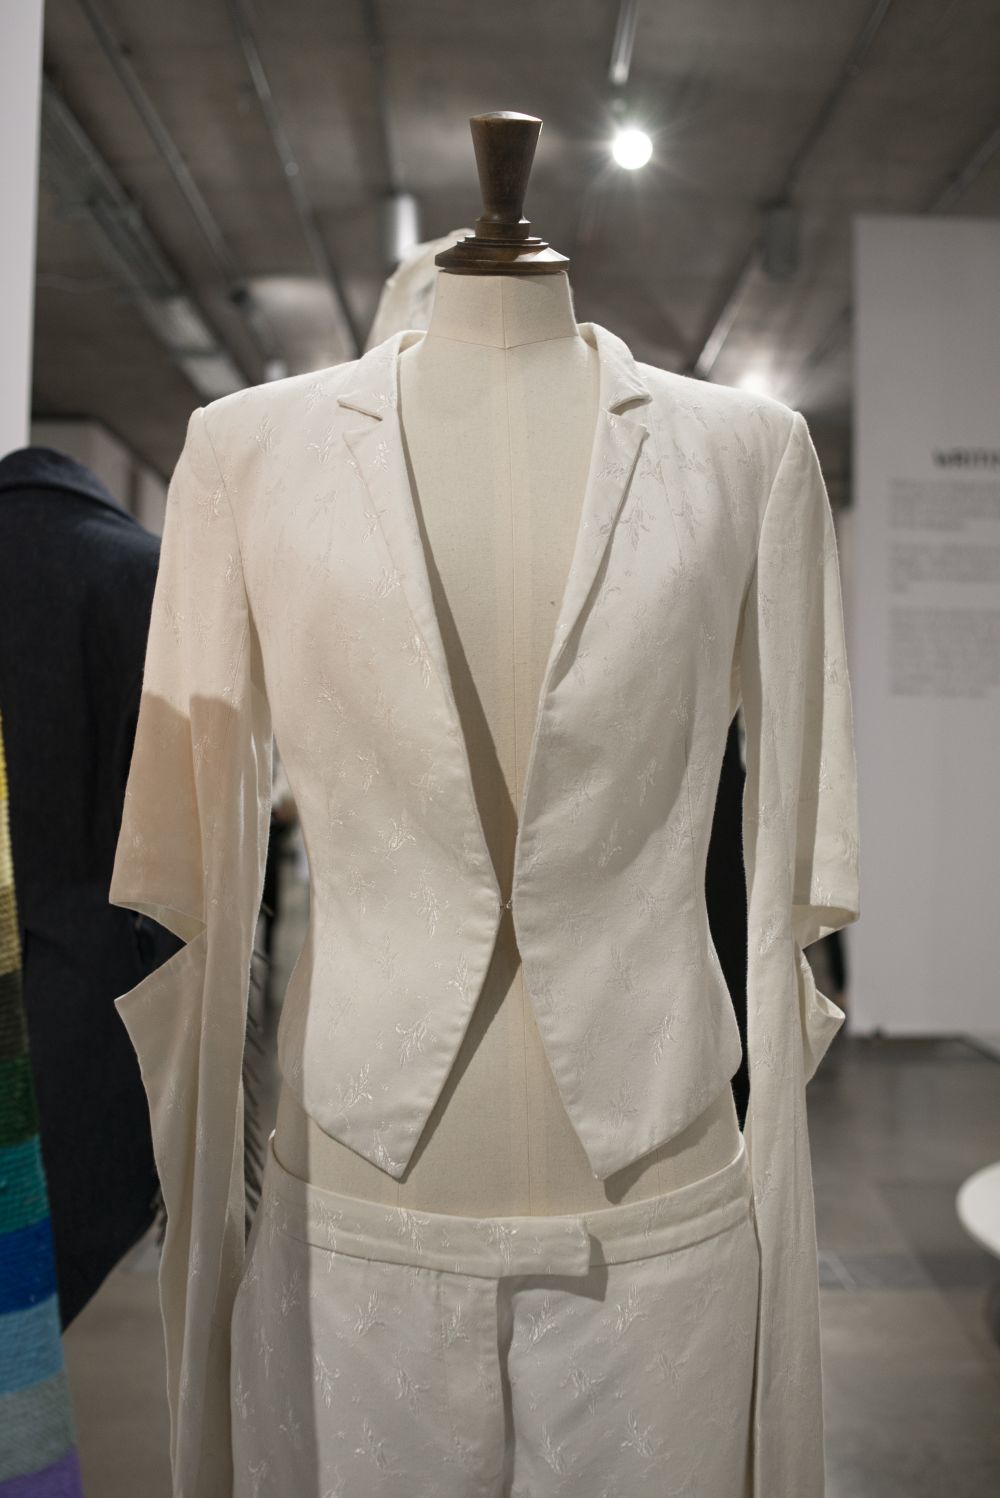 Detail of white suit and trousers on mannequin